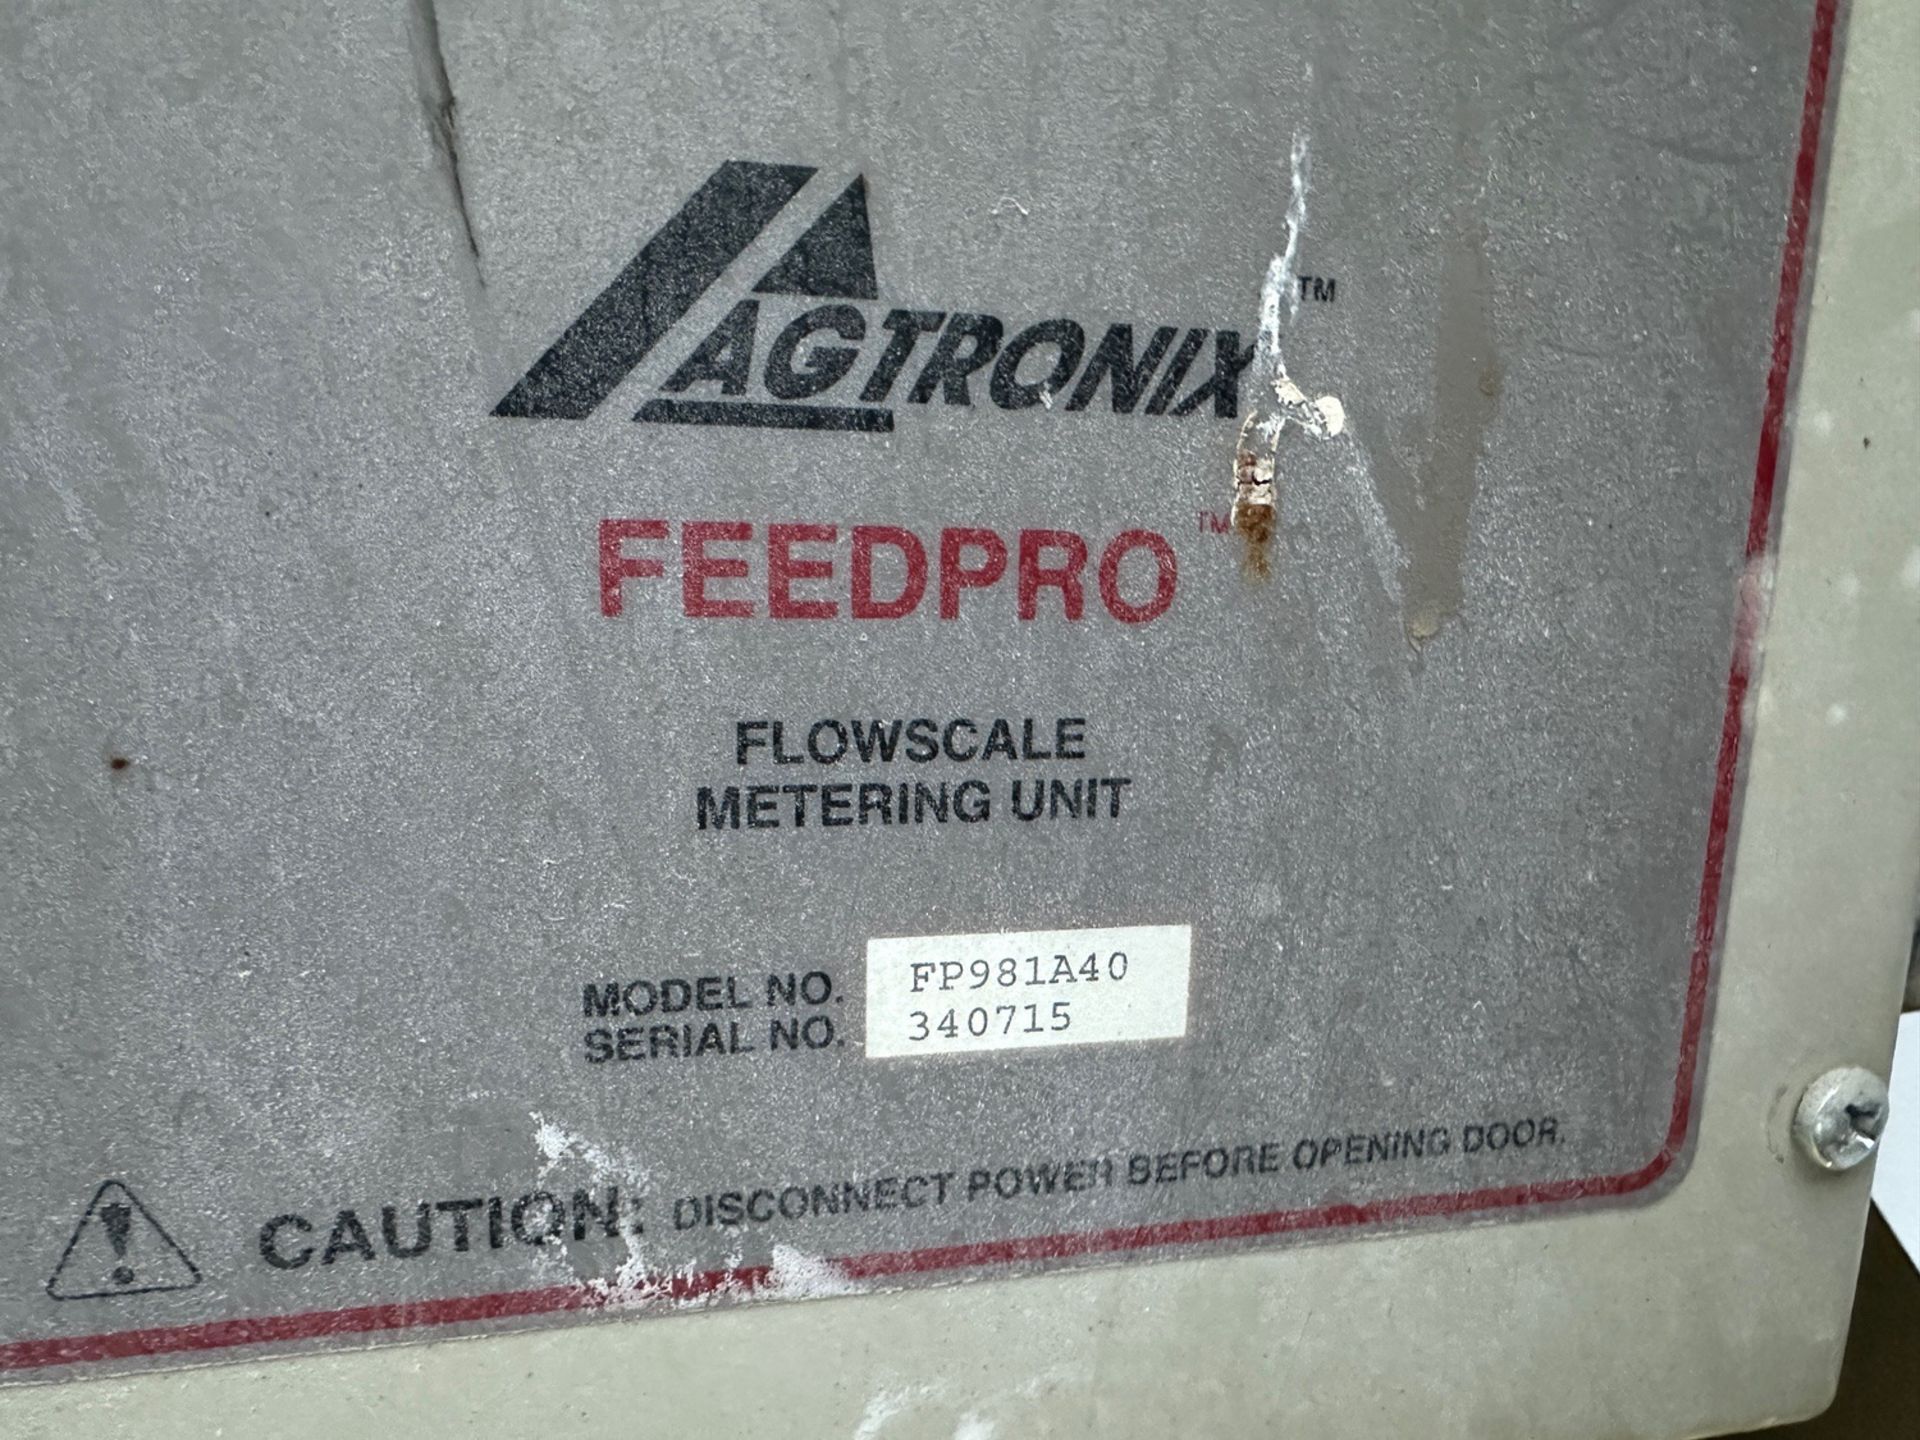 Agtronix Feedpro Flowscale Metering Unit (Wheat) - Model FP981A40 - S/N 340715 | Rig Fee $500 - Image 2 of 3